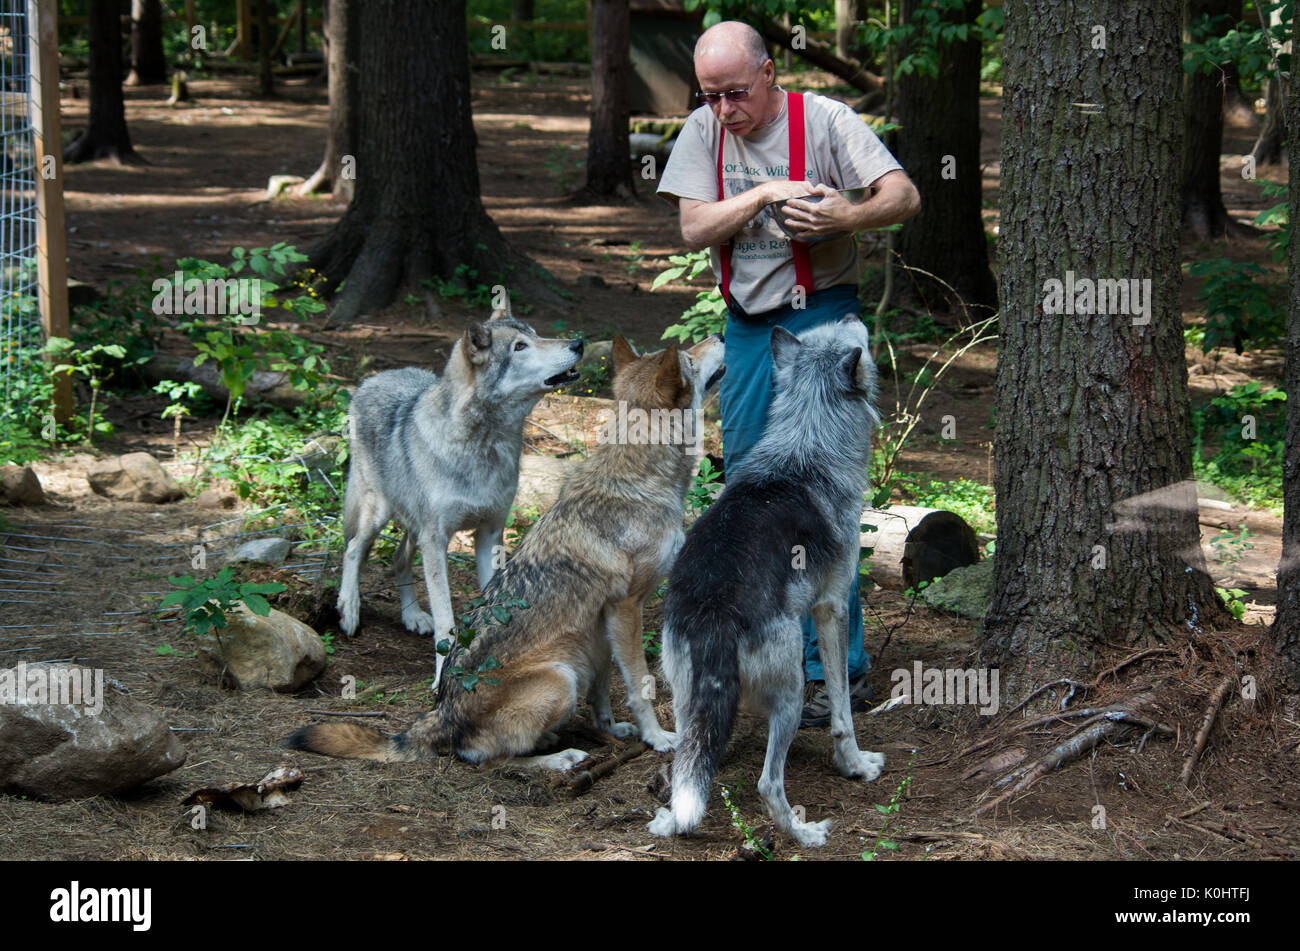 Gray wolves being feed by one of the care takers Stock Photo